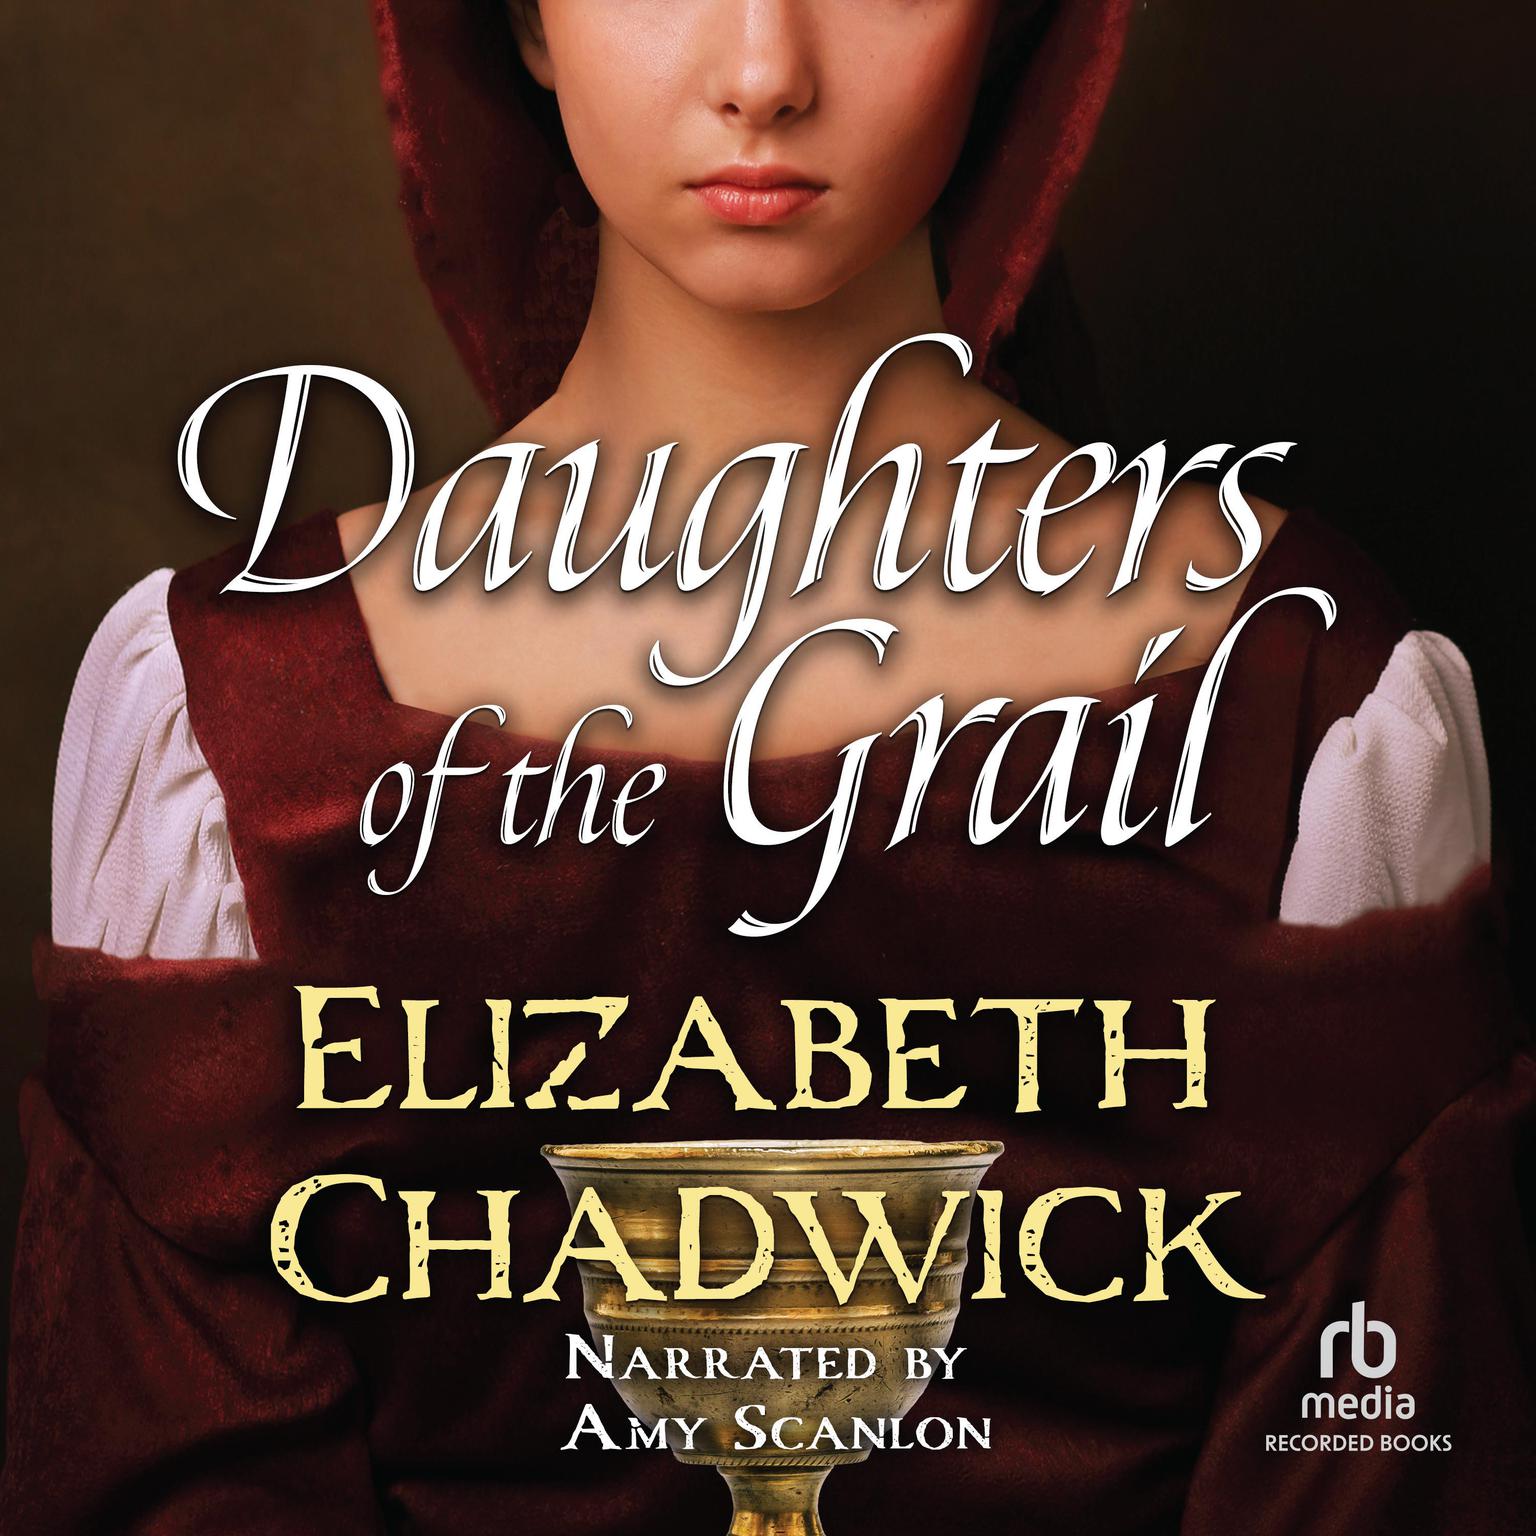 Daughters of the Grail Audiobook, by Elizabeth Chadwick